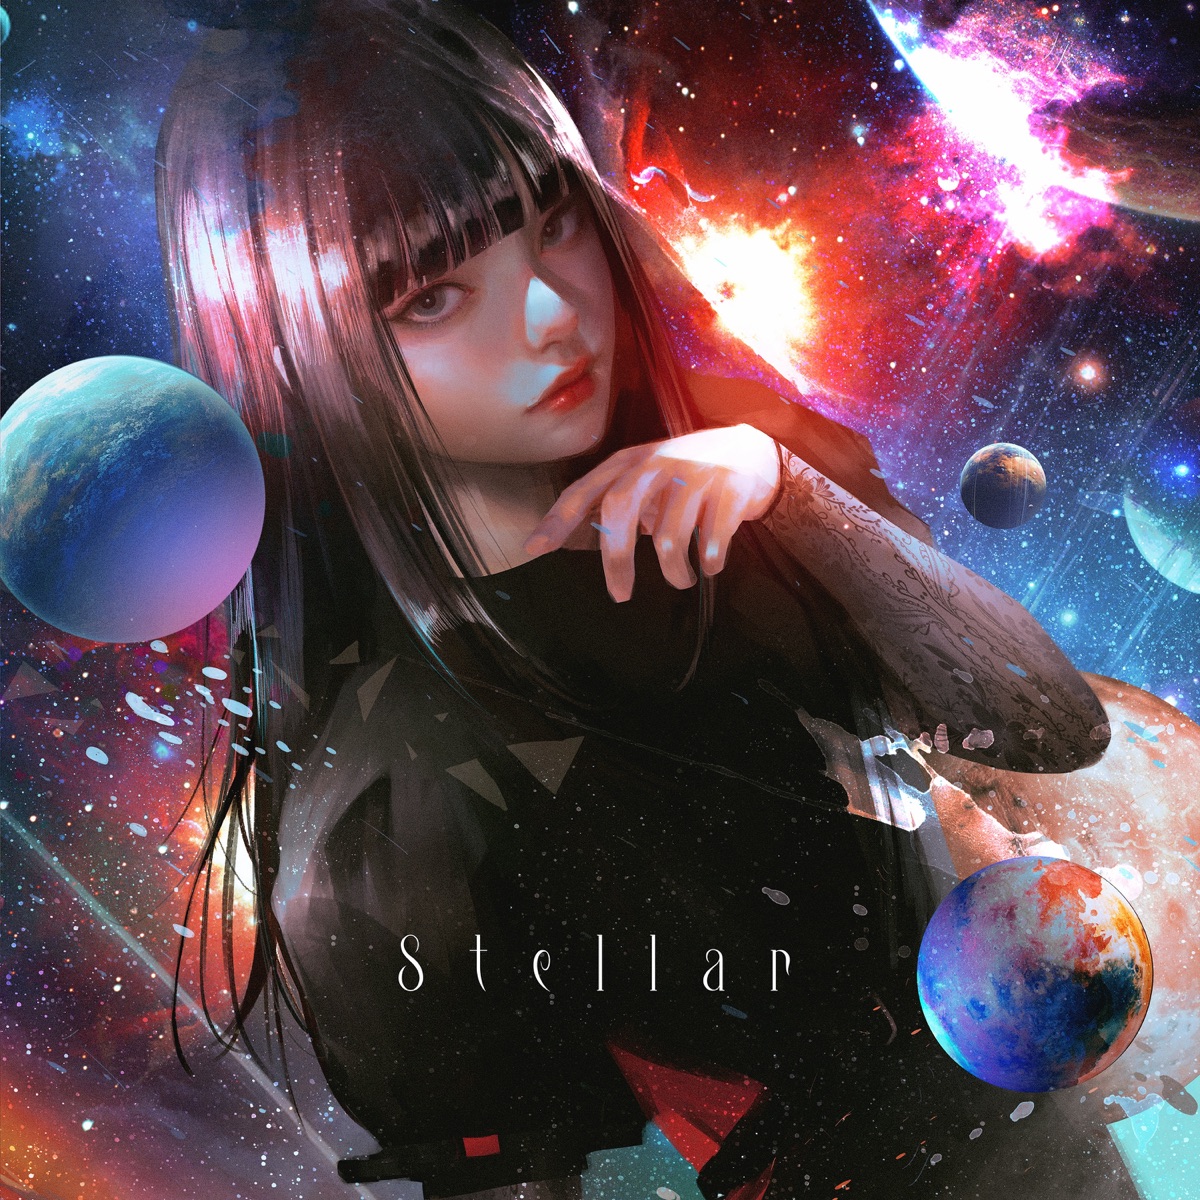 Cover art for『ASCA - Stellar』from the release『Stellar